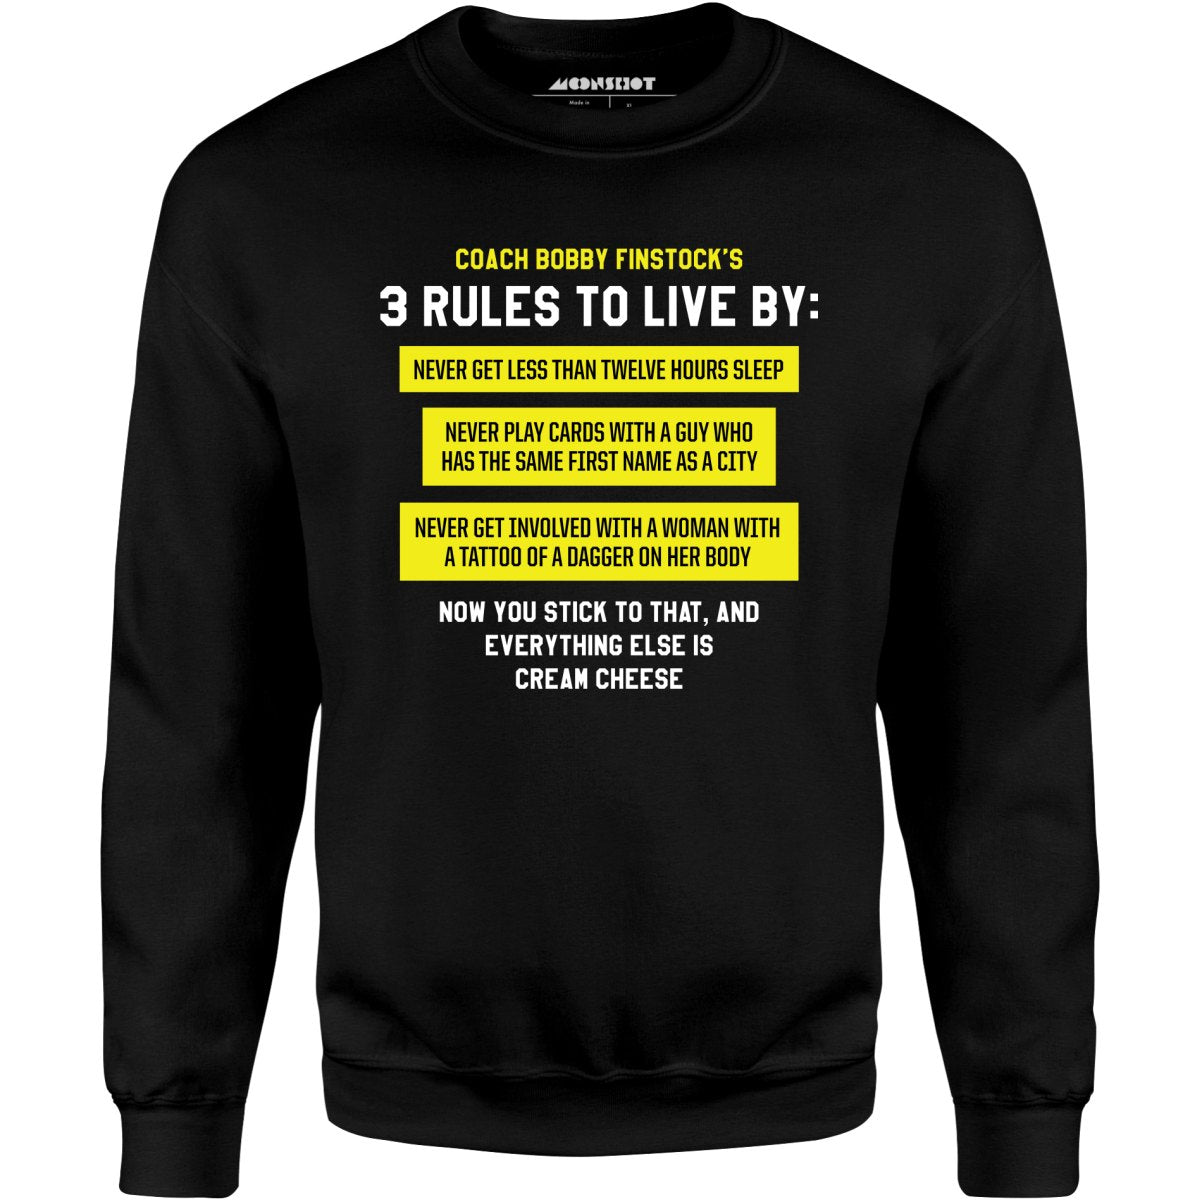 Coach Bobby Finstock's 3 Rules to Live By - Unisex Sweatshirt